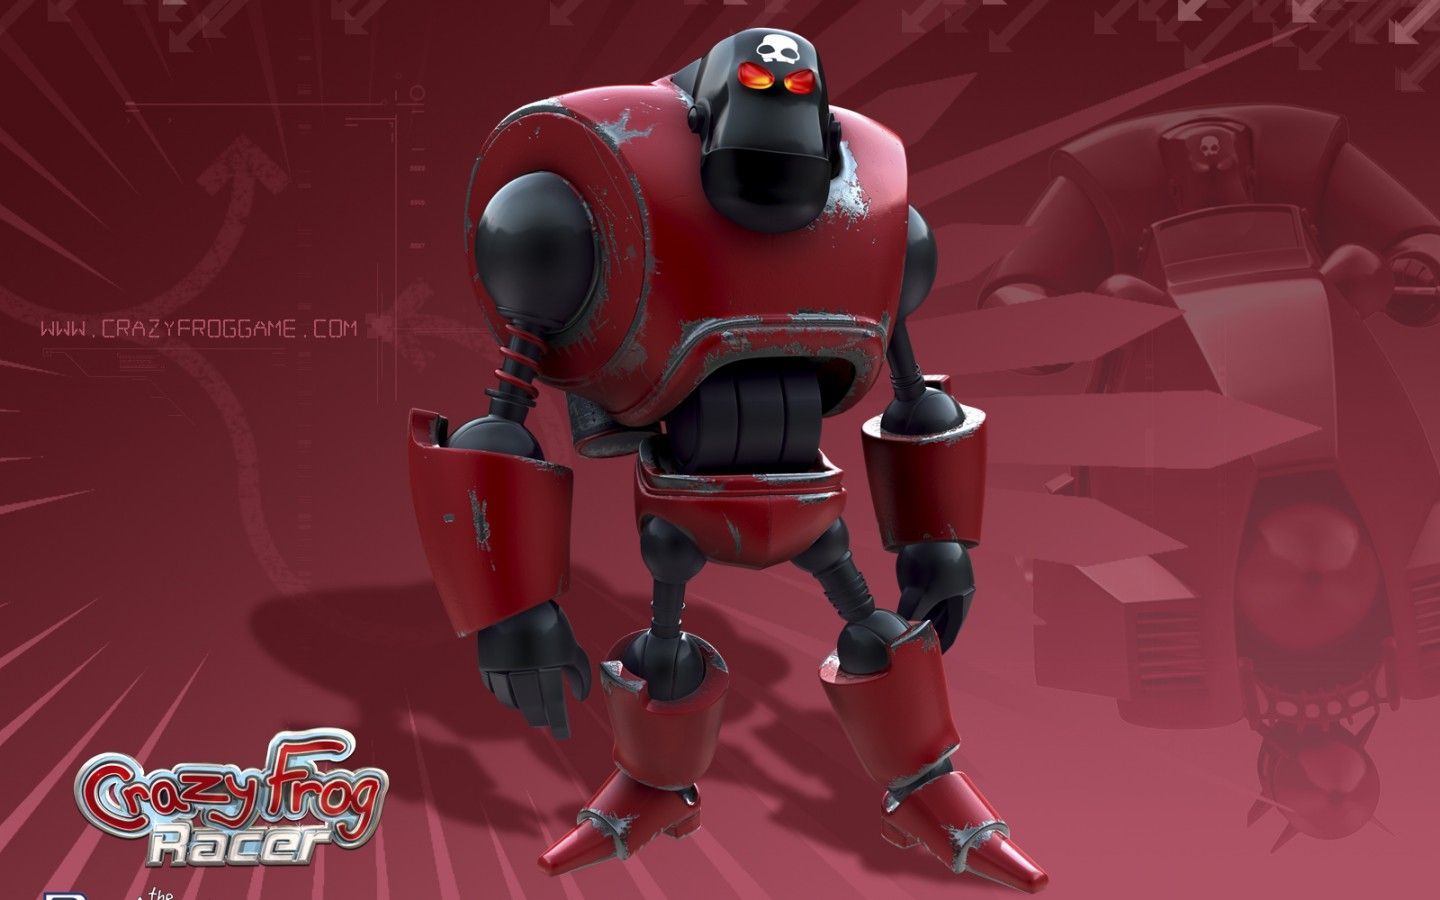 Crazy Frog Racer, computer games, red 1440x900, widescreen ...